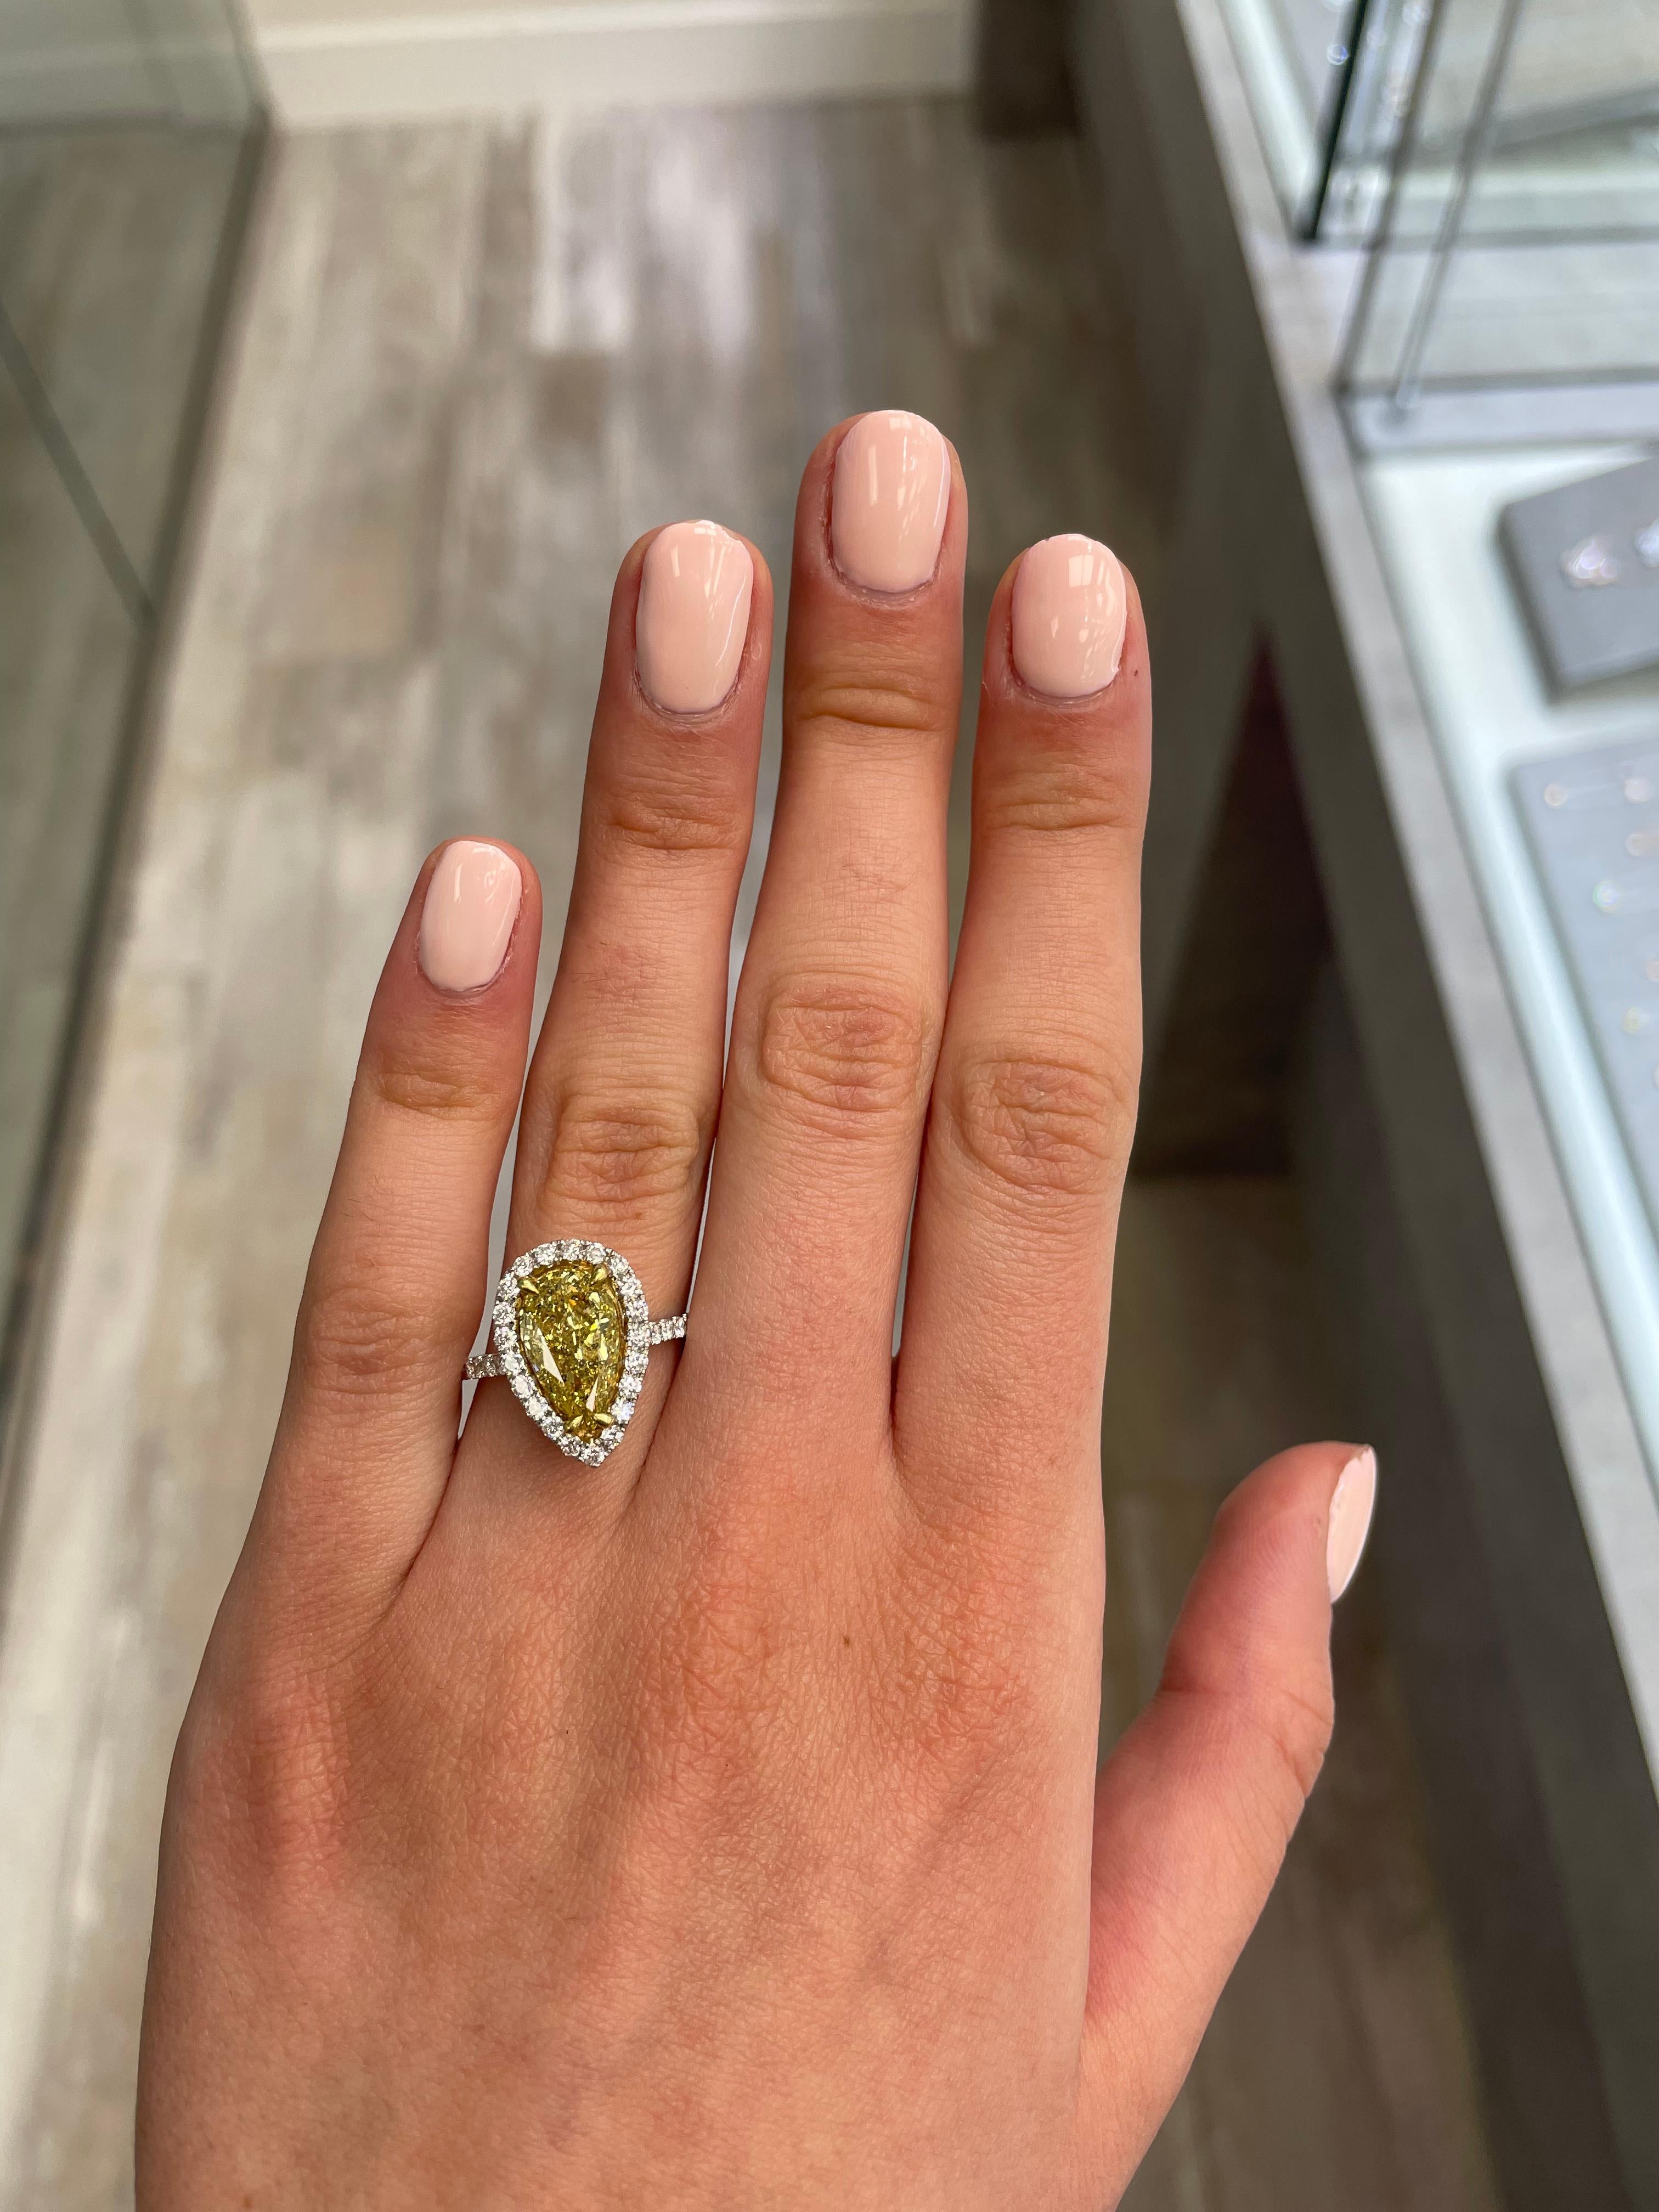 Stunning modern EGL certified yellow diamond with halo ring, two-tone 18k yellow and white gold. By Alexander Beverly Hills
2.90 carats total diamond weight.
2.25 carat pear cut Fancy Vivid Yellow color and SI3 clarity diamond, EGL graded.